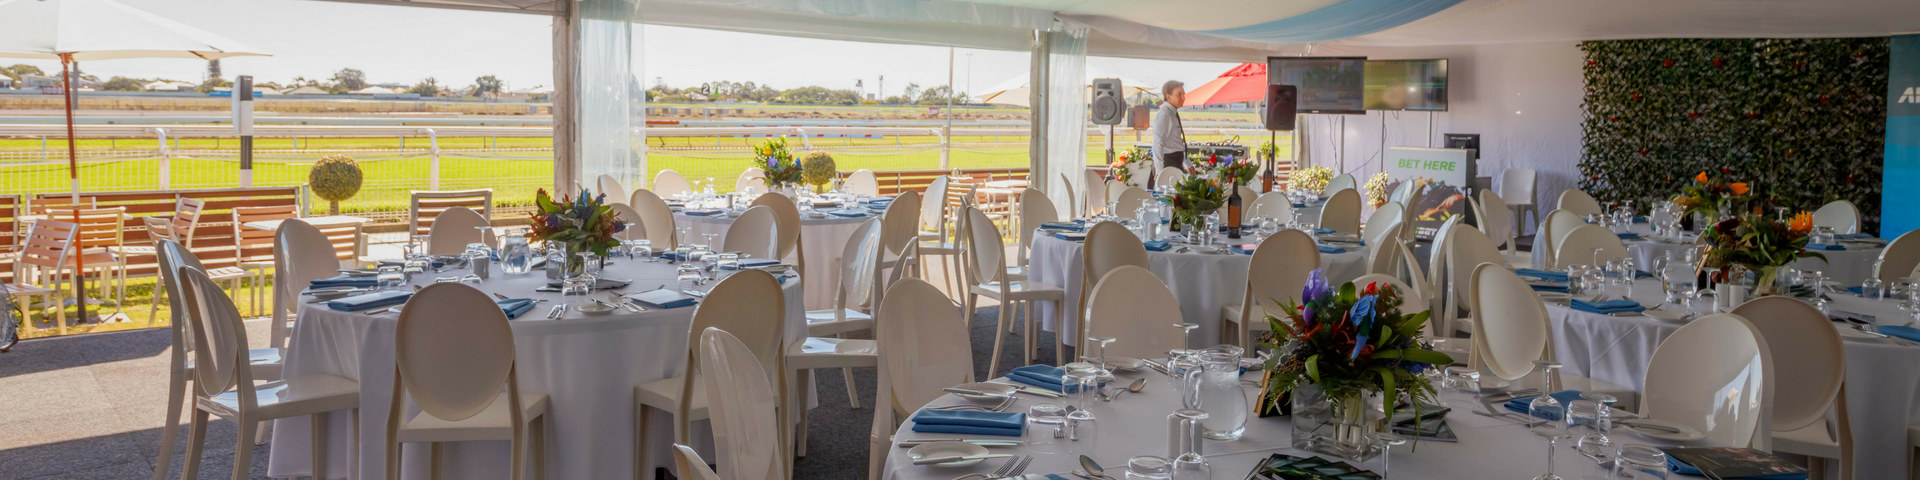 Book Now your Private Trackside Marquee for Christmas At The Races and enjoy exclusive area for your employees or friends with a great range of hospitality options